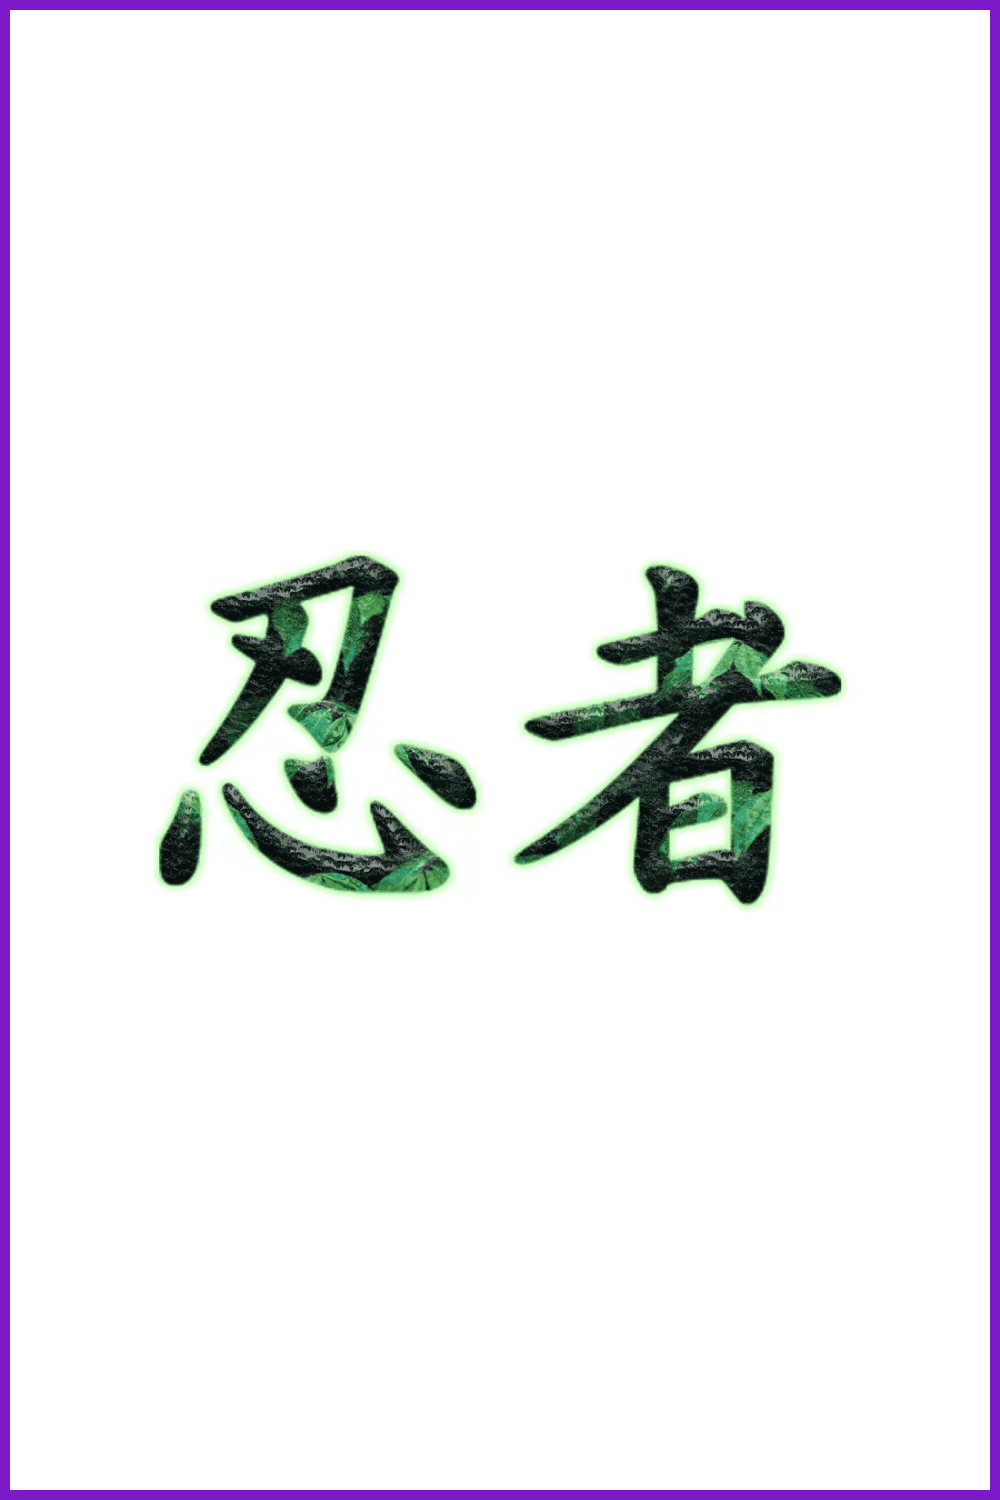 Two Chinese characters in green on a white background.